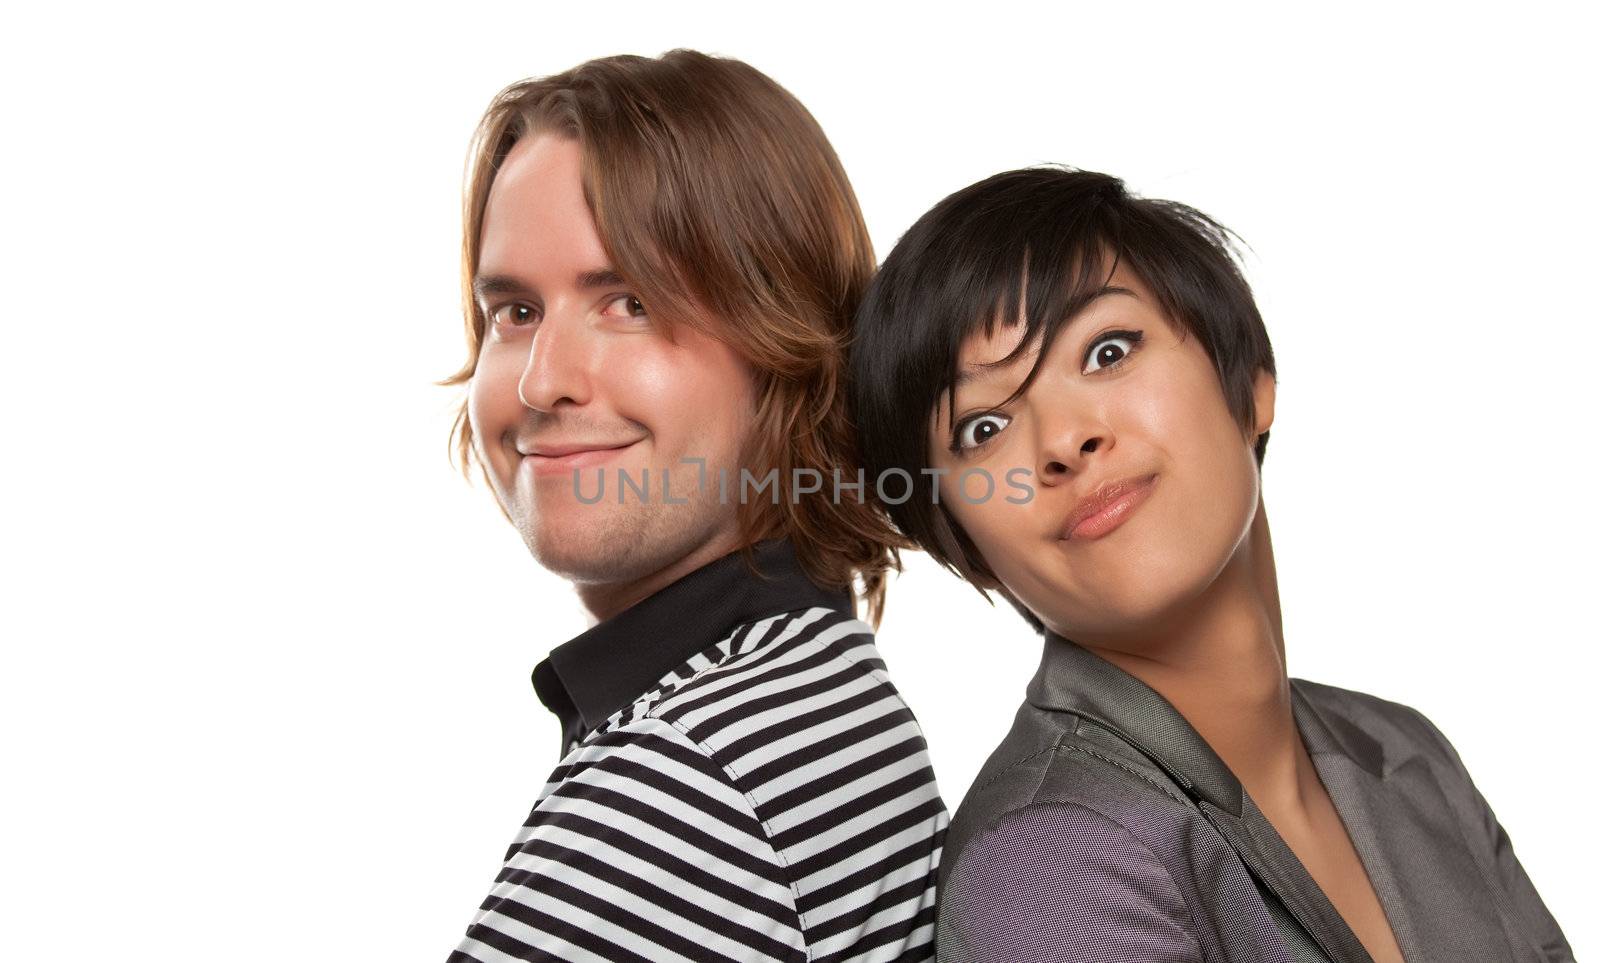 Diverse Caucasian Male and Multiethnic Female Portrait by Feverpitched